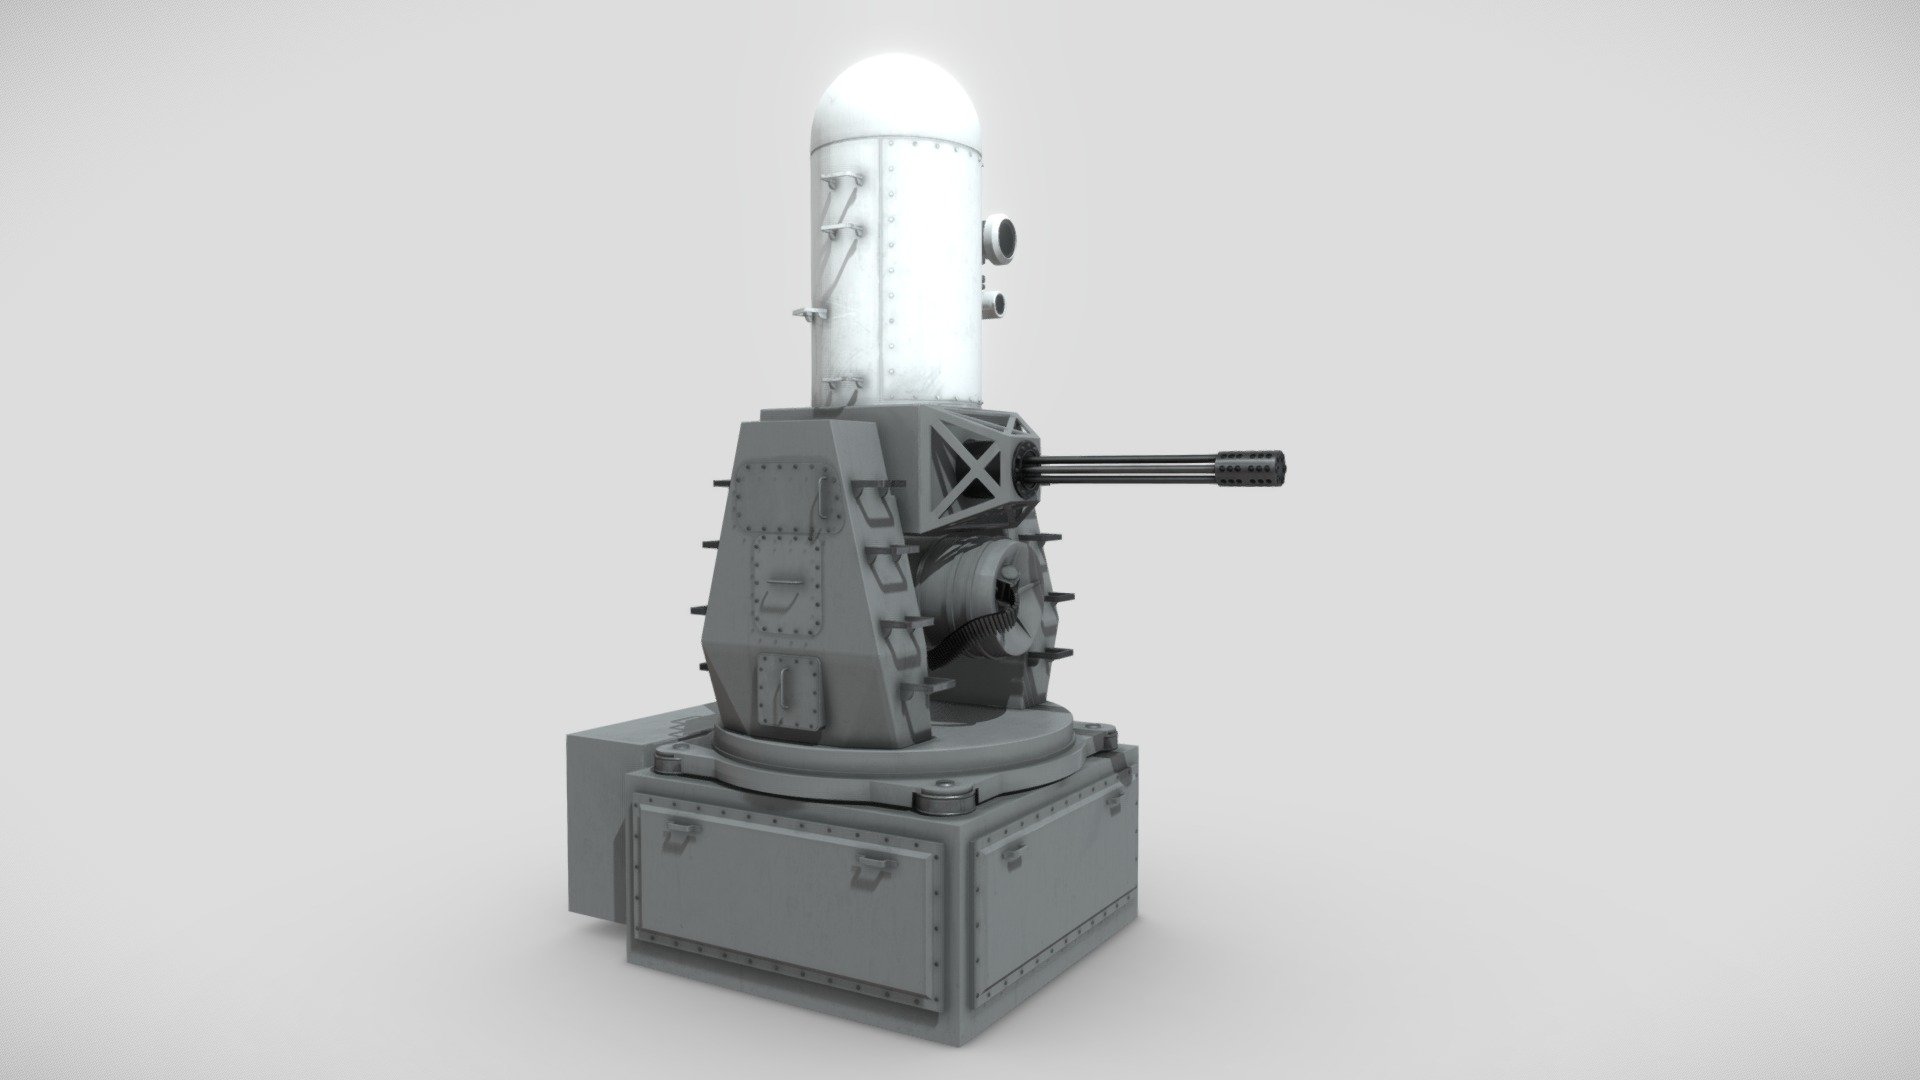 The Phalanx is a close in weapon system used by various navies around the world as defence against anti-ship missiles.

This 3D model was created using 3ds Max, with textures designed in Substance Painter. The model has been meticulously unwrapped and divided into separate parts, enabling the base and turret to rotate seamlessly. If necessary, I am also capable of exporting the textures in various formats suitable for Unity, Unreal Engine, or V-Ray integration 3d model